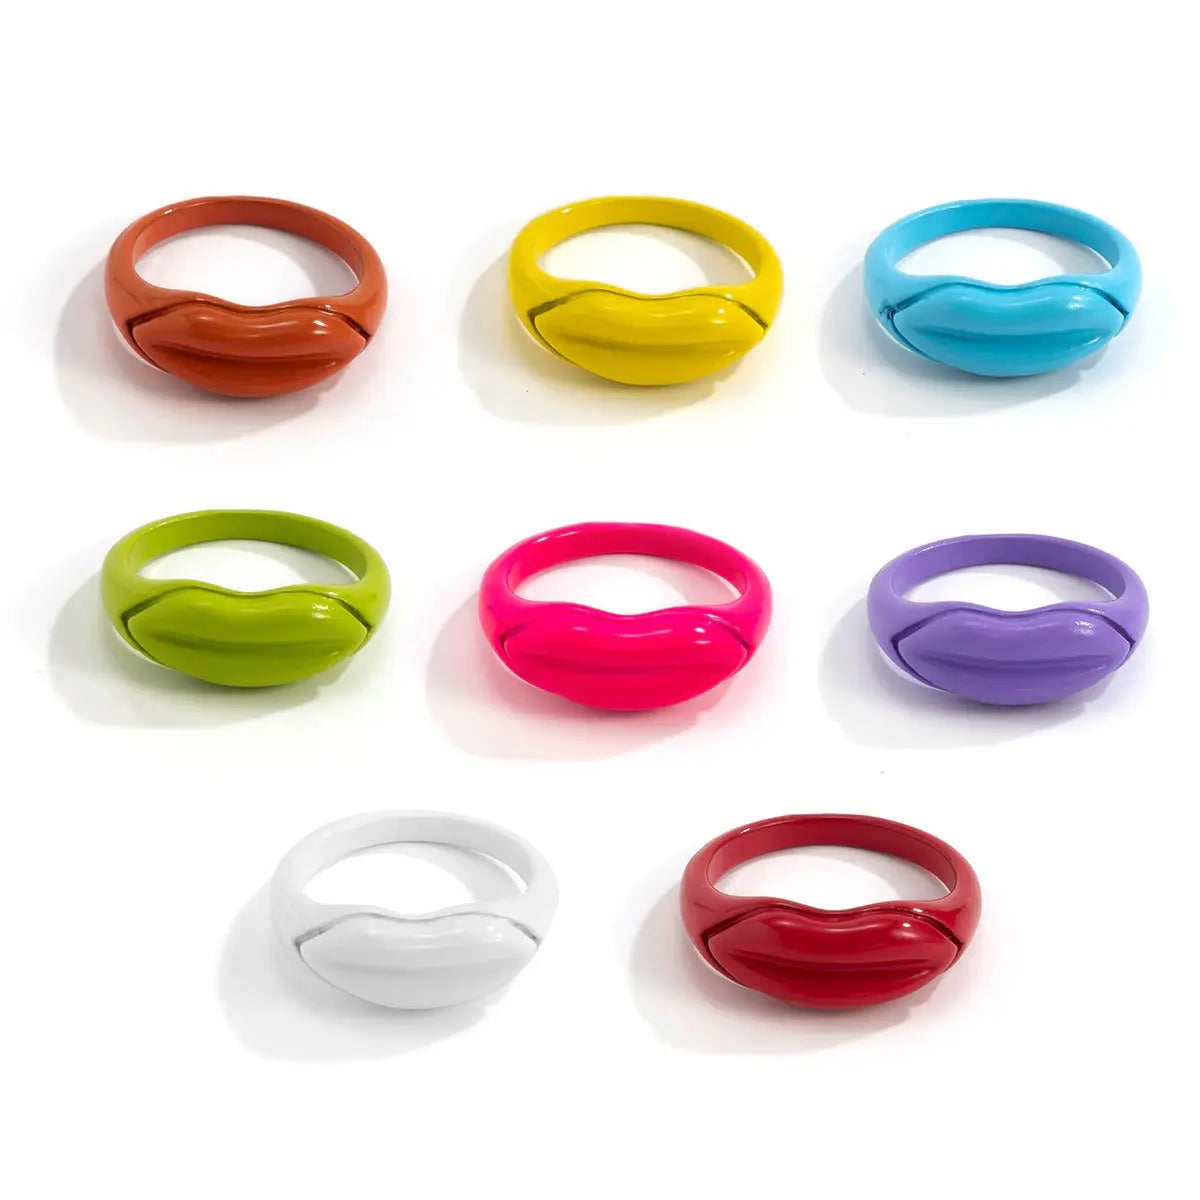 Lip Shaped Pastel Rings - Colourful Midi Knuckle Rings for Women Girls